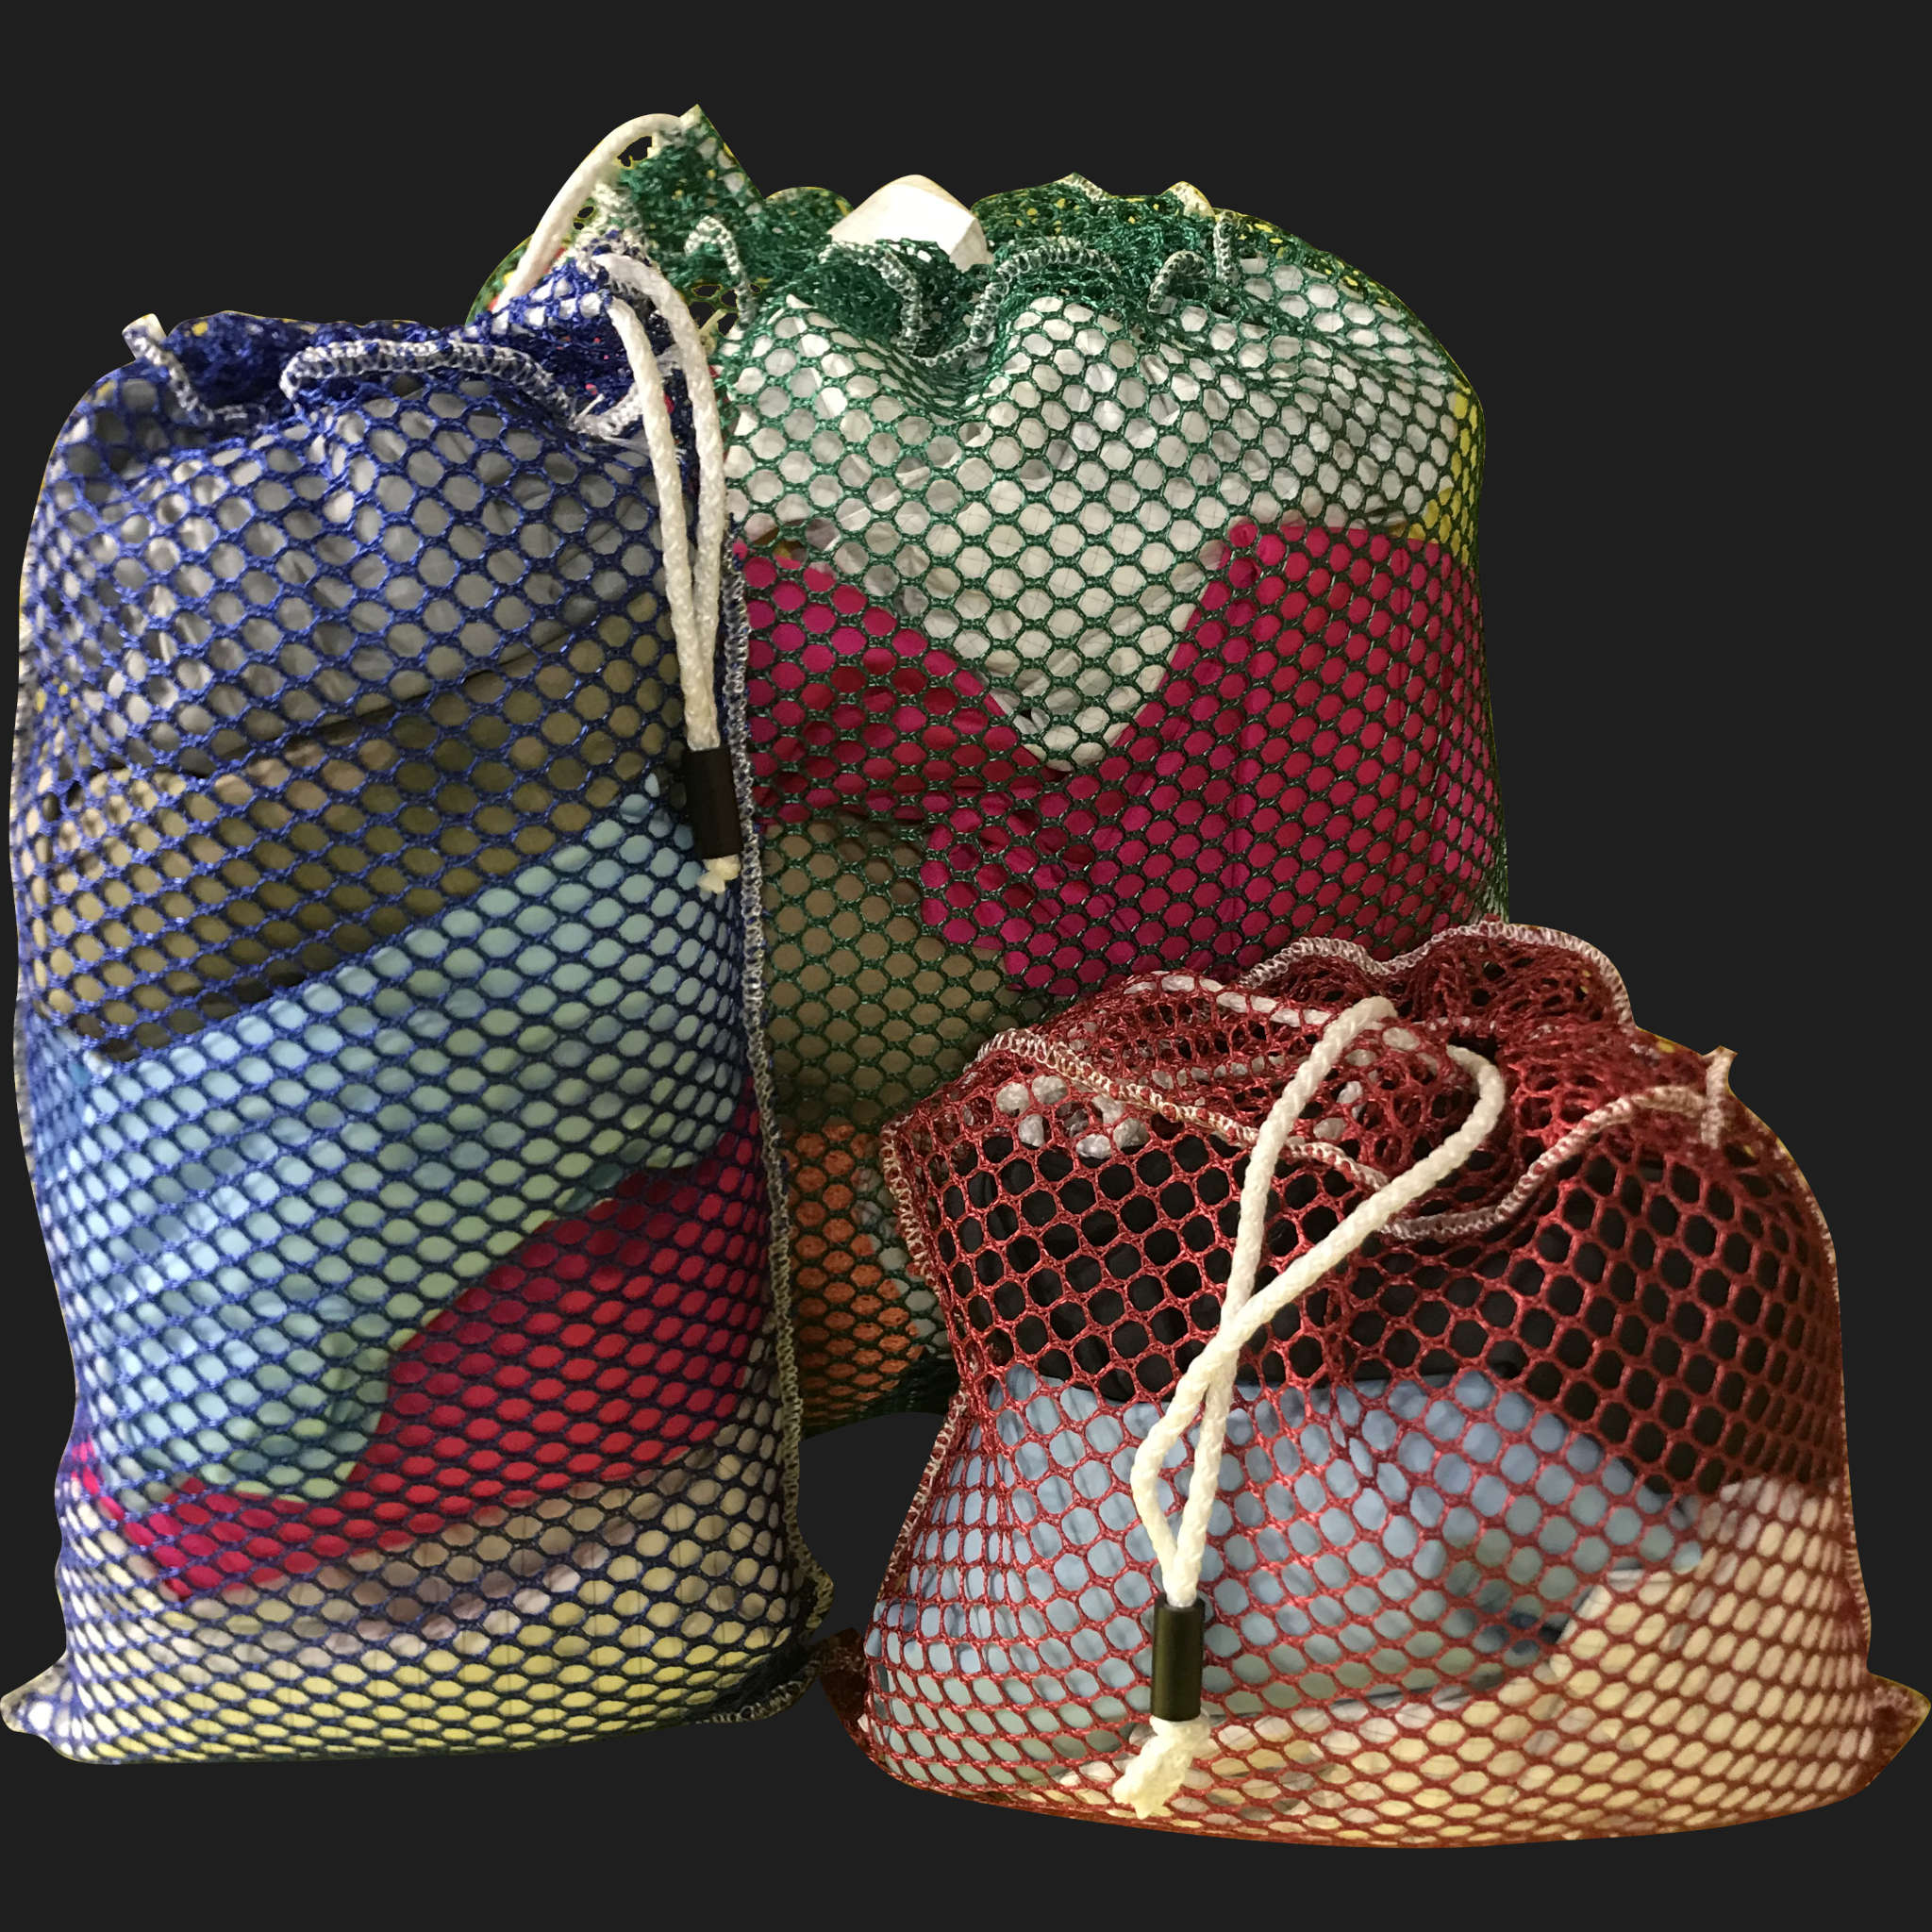 16" x 24" Customized Mesh-Net-Laundry Bags Heavy Duty with Cord and barrellock closure